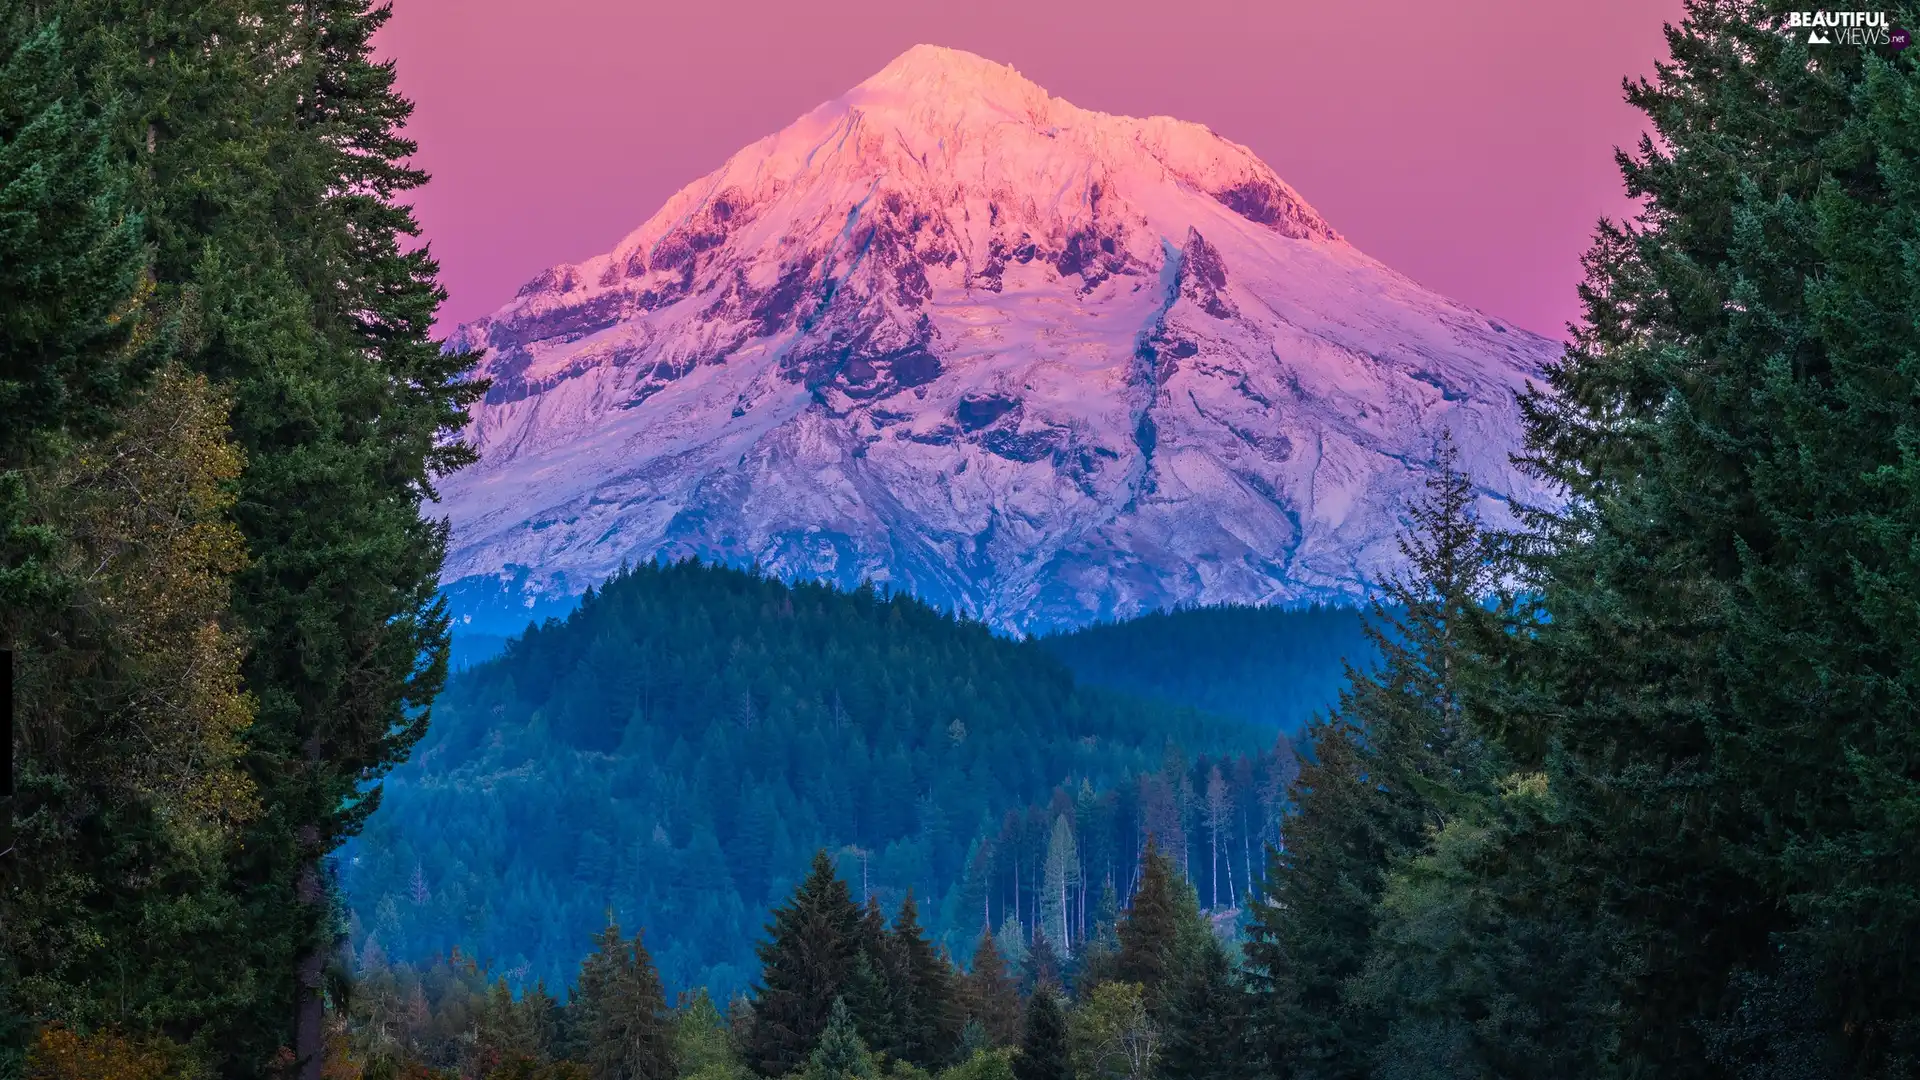 viewes, Stratovolcano, mount, State of Oregon, snow, mountains, Mount Hood, The United States, Spruces, trees